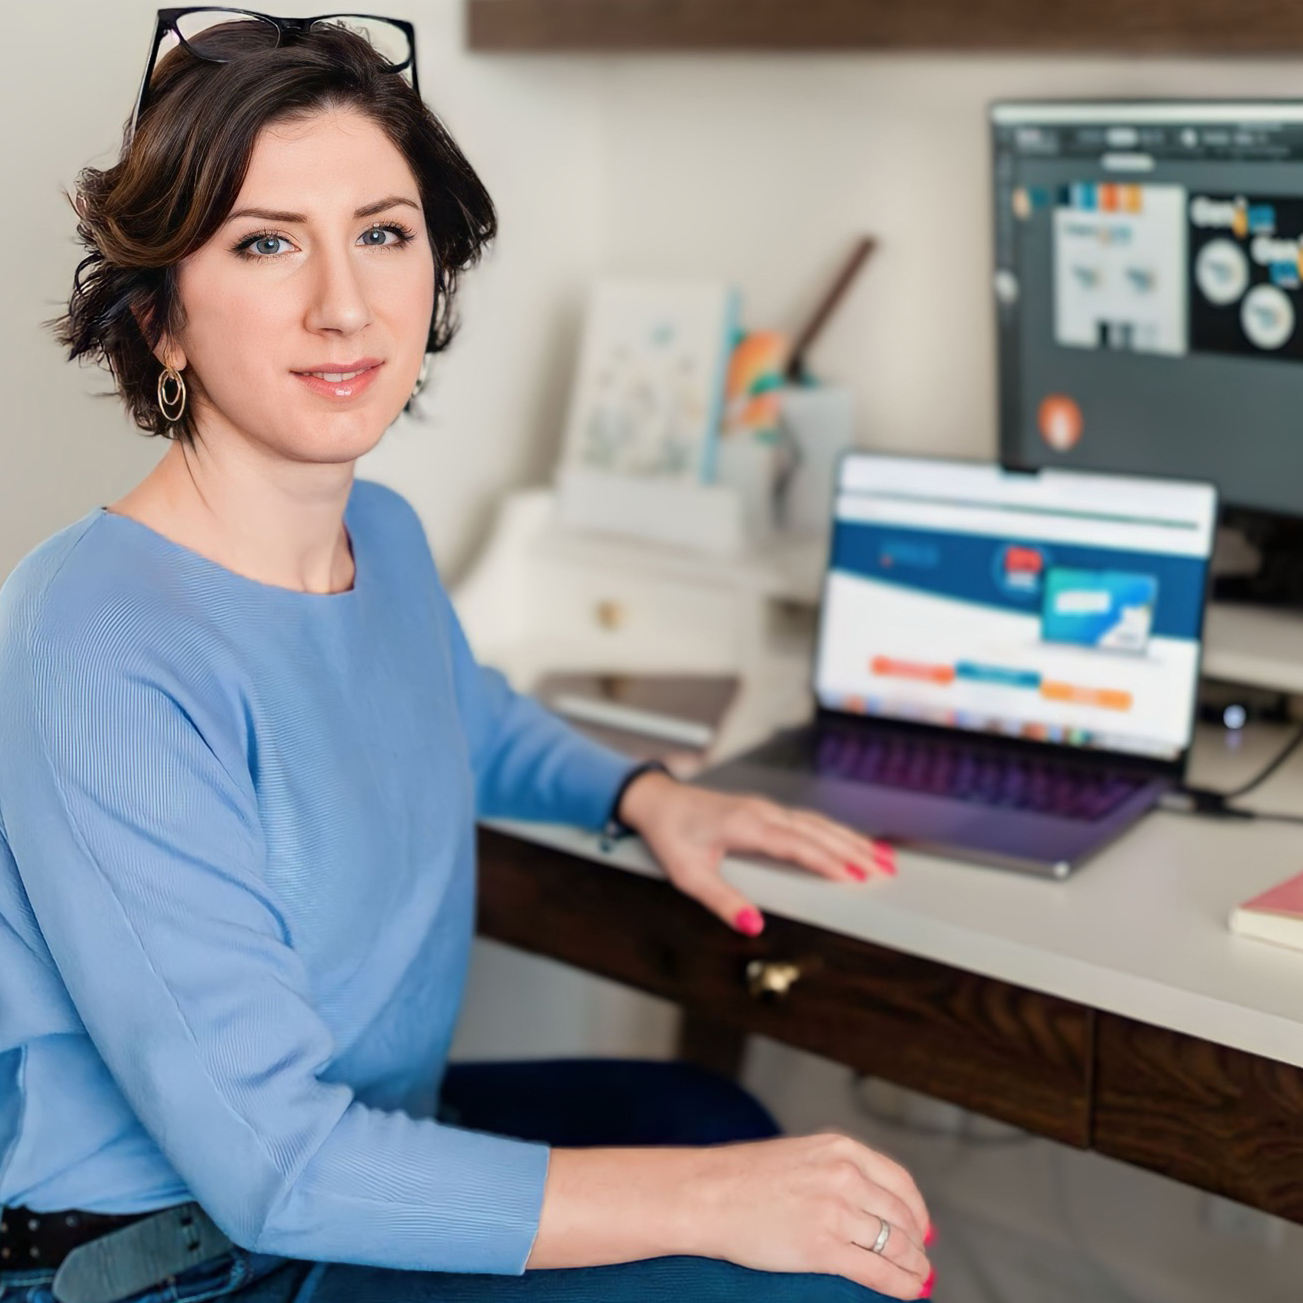 Woman sitting at desk with computer in the background. She is wearing glasses on top of her head, has short brown hair and is wearing a blue shirt. 